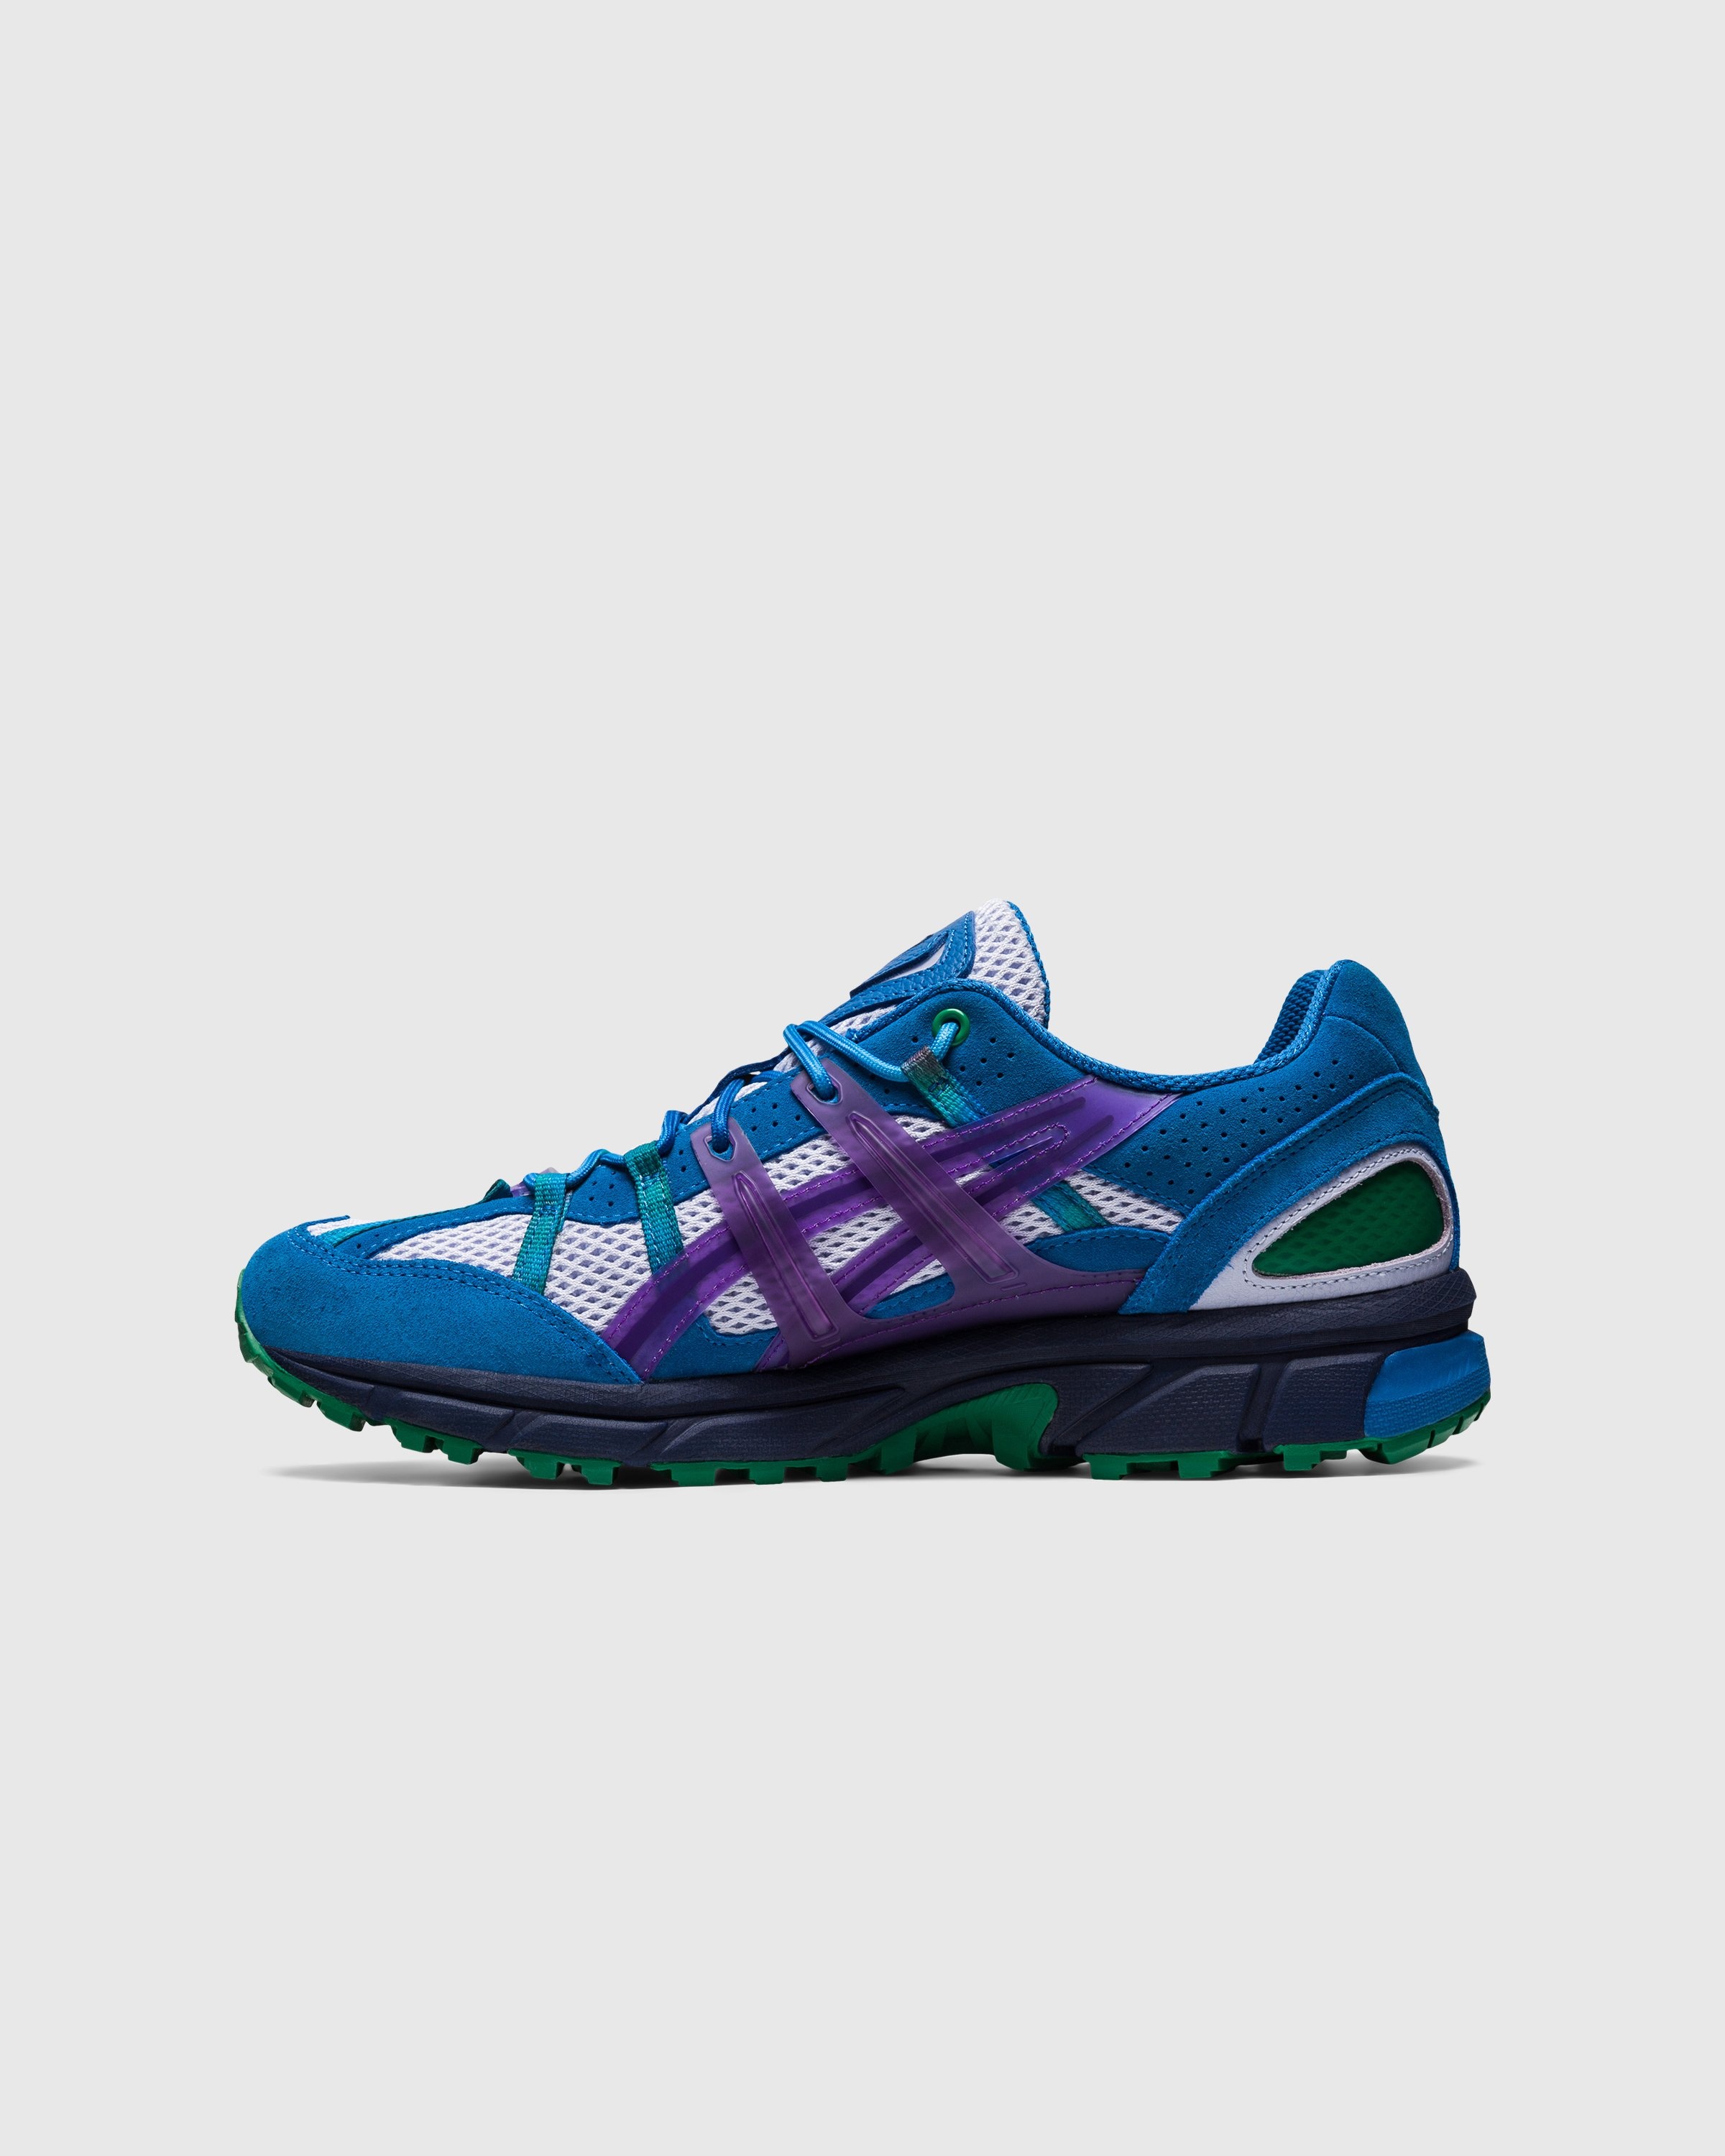 asics x A.P.C. – GEL-SONOMA 15-50 Lilac Opal/Gentry Purple - Low Top Sneakers - Purple - Image 2